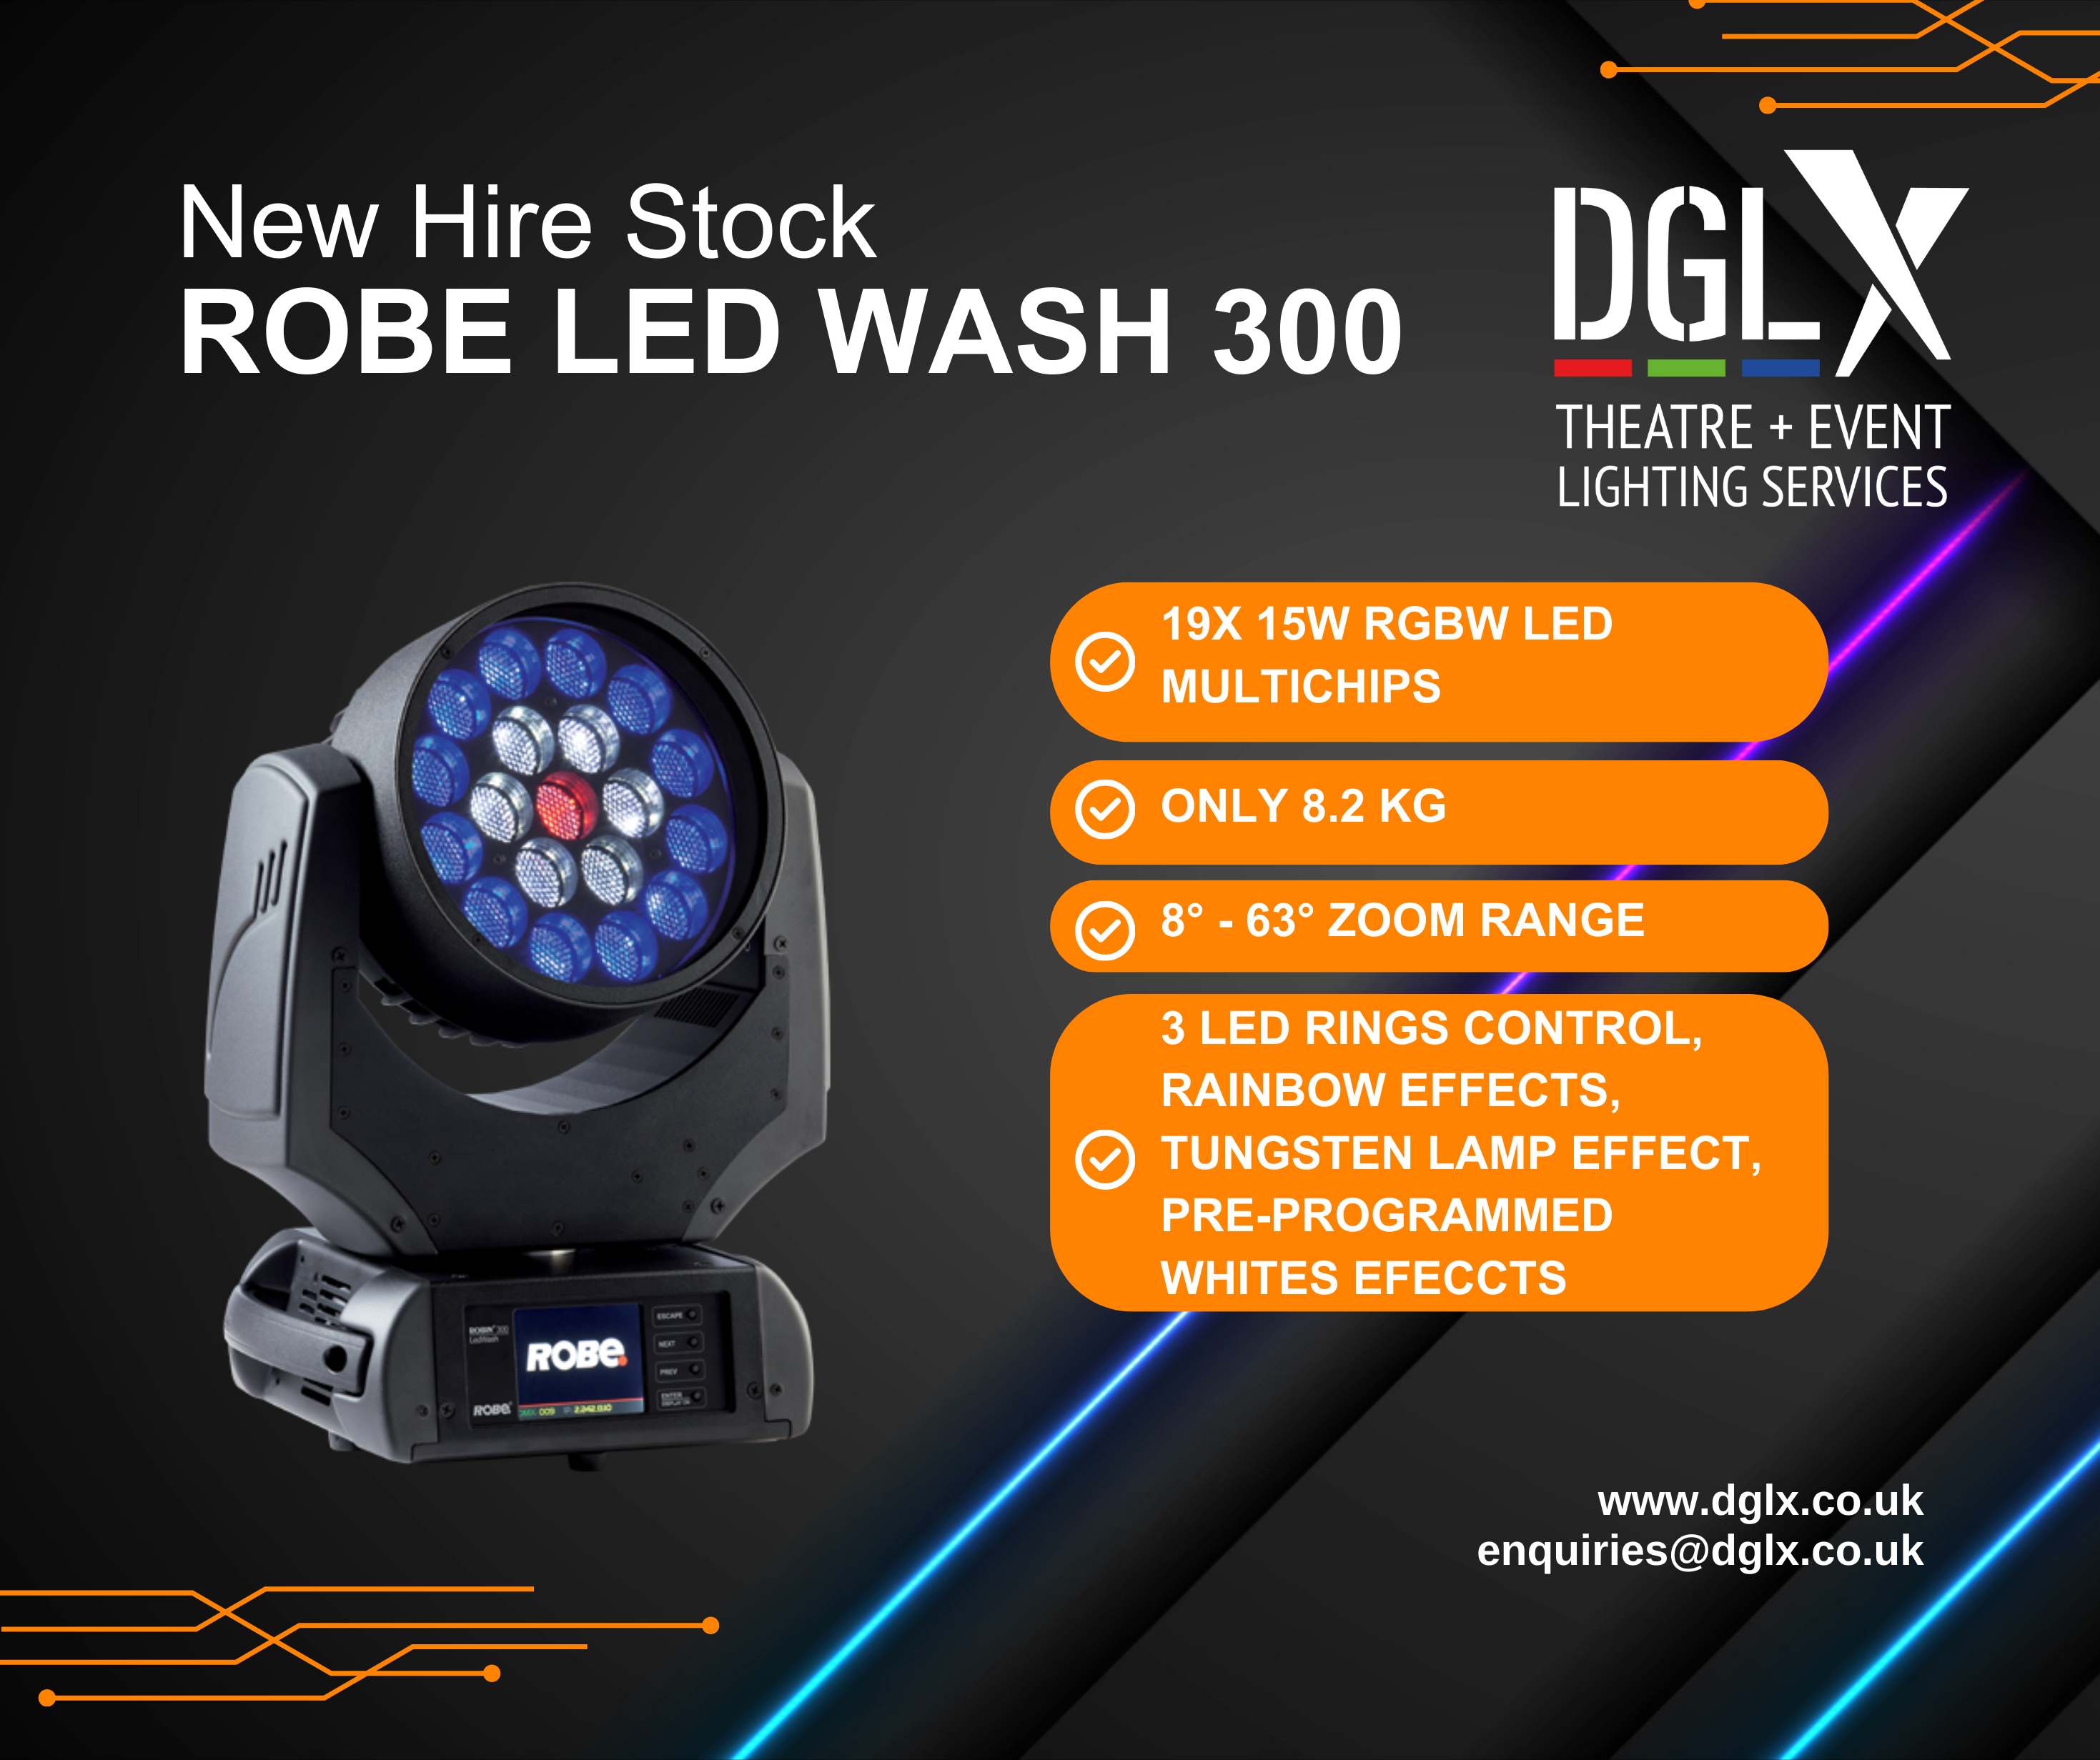 Robe LEDWash 300 Now in Hire Stock